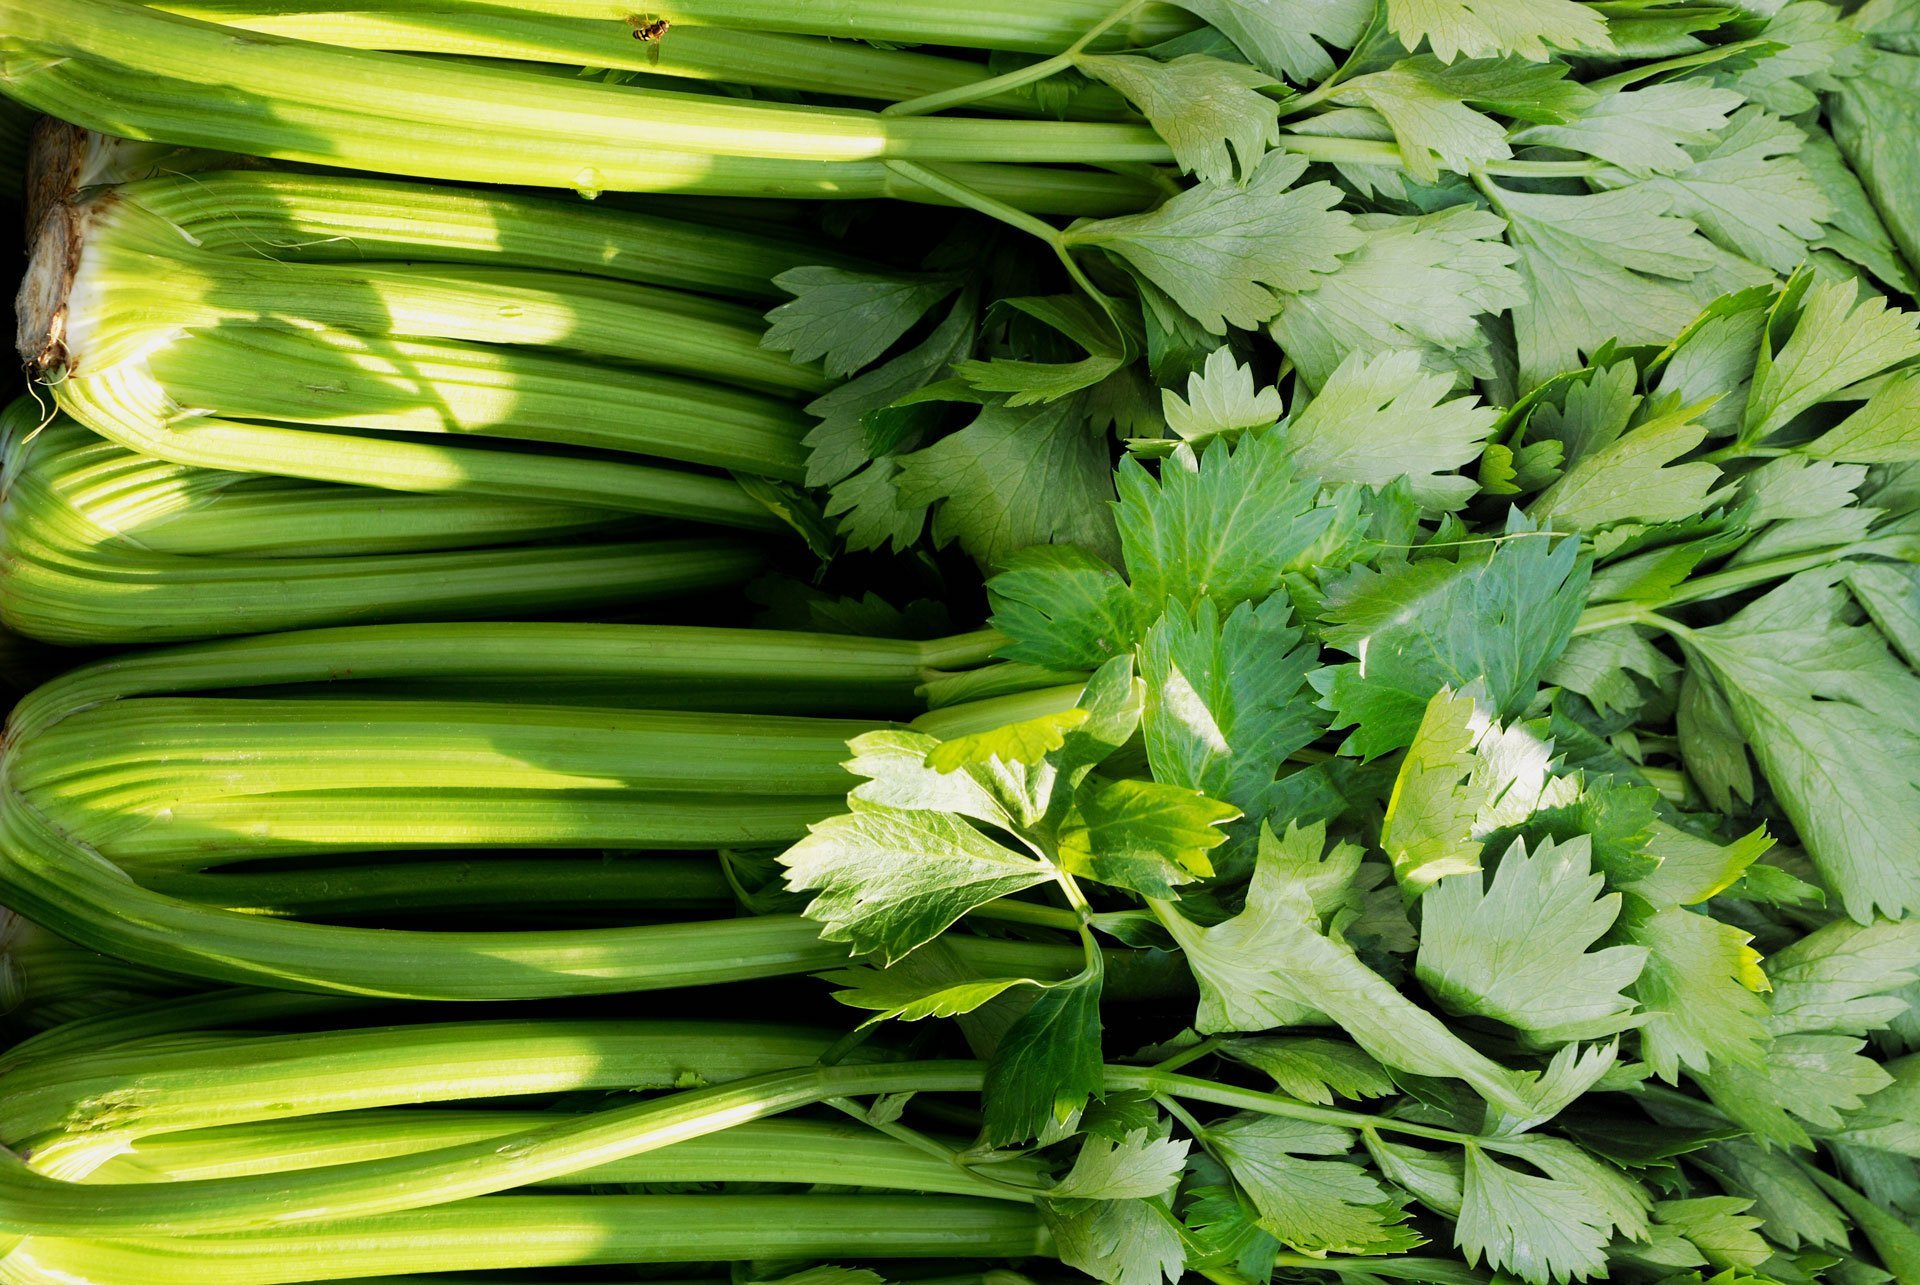 How to Use Celery Leaves